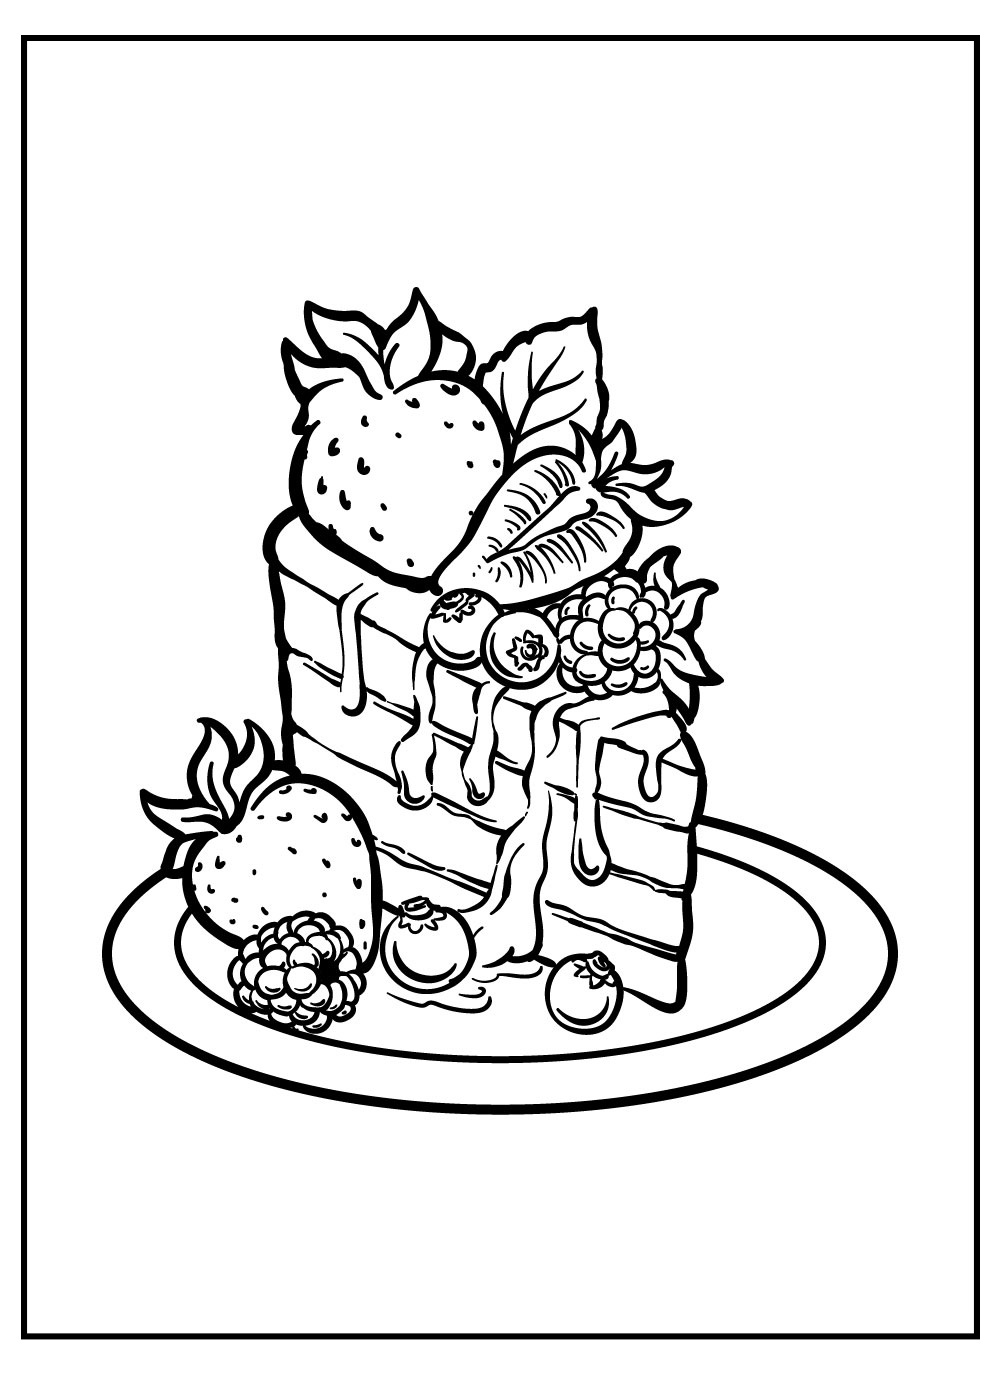 A Piece Of Birthday Cake For Kids Coloring Page